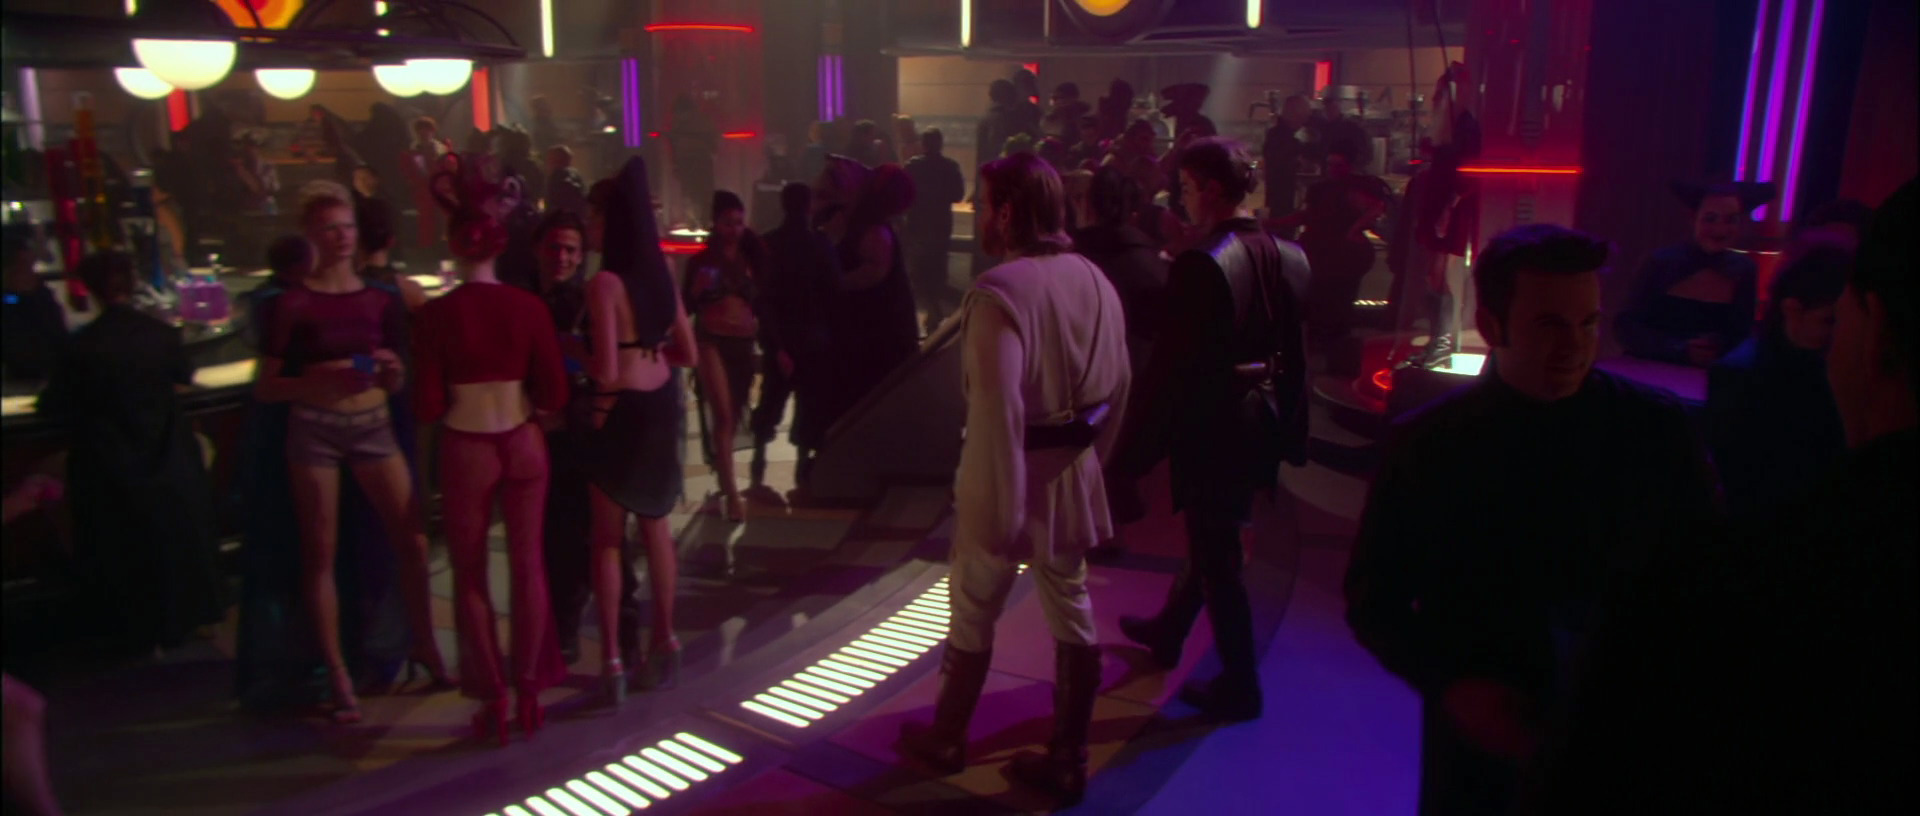 Fan Video: Can You Spot All The Cameos In This Nightclub Mash Up?